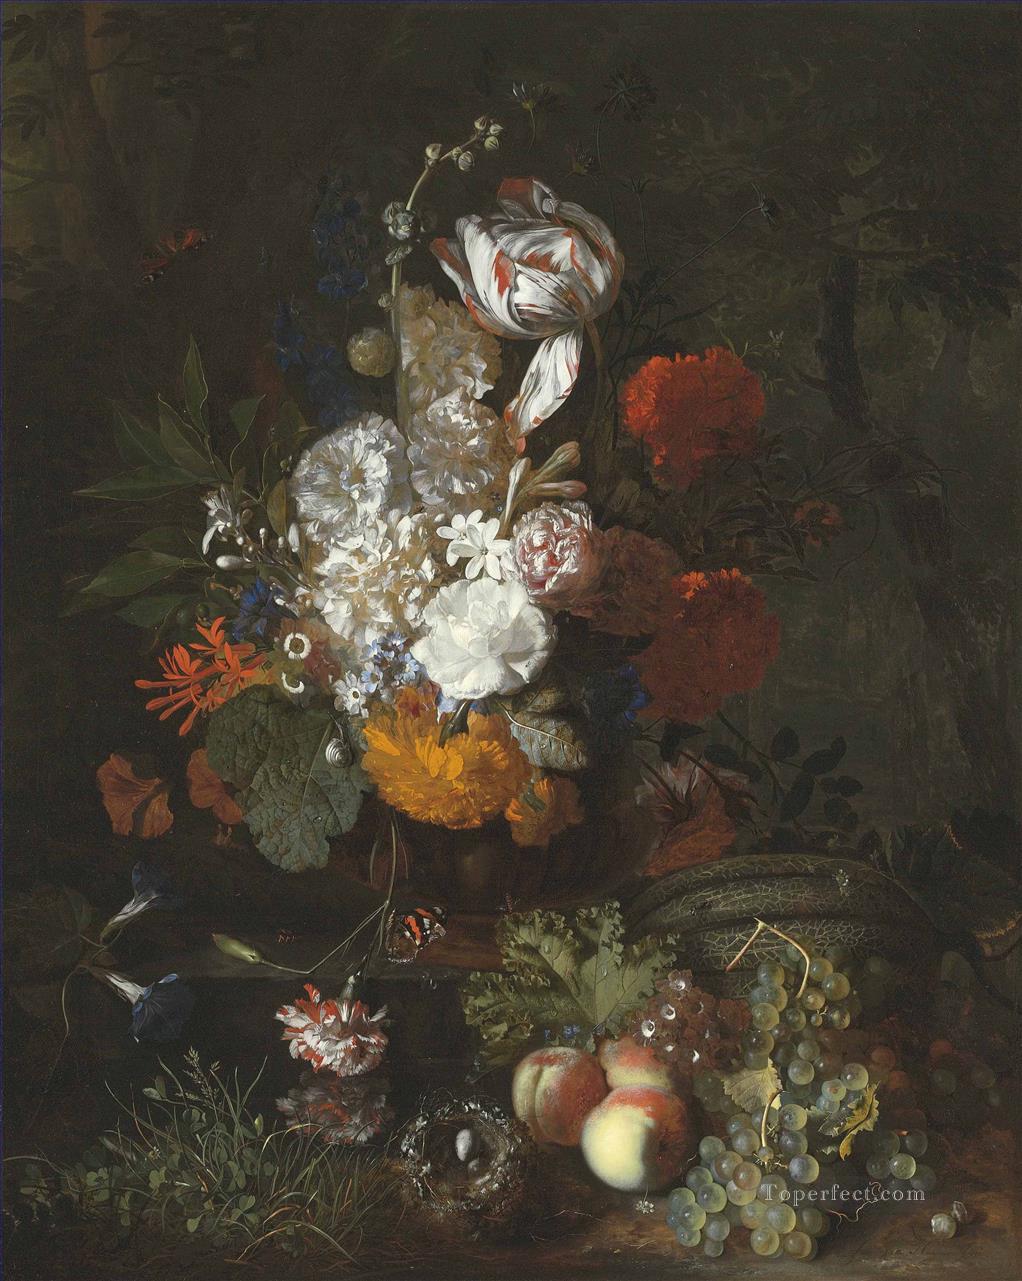 A still life with flowers and fruits with a bird nest and eggs Jan van Huysum Oil Paintings